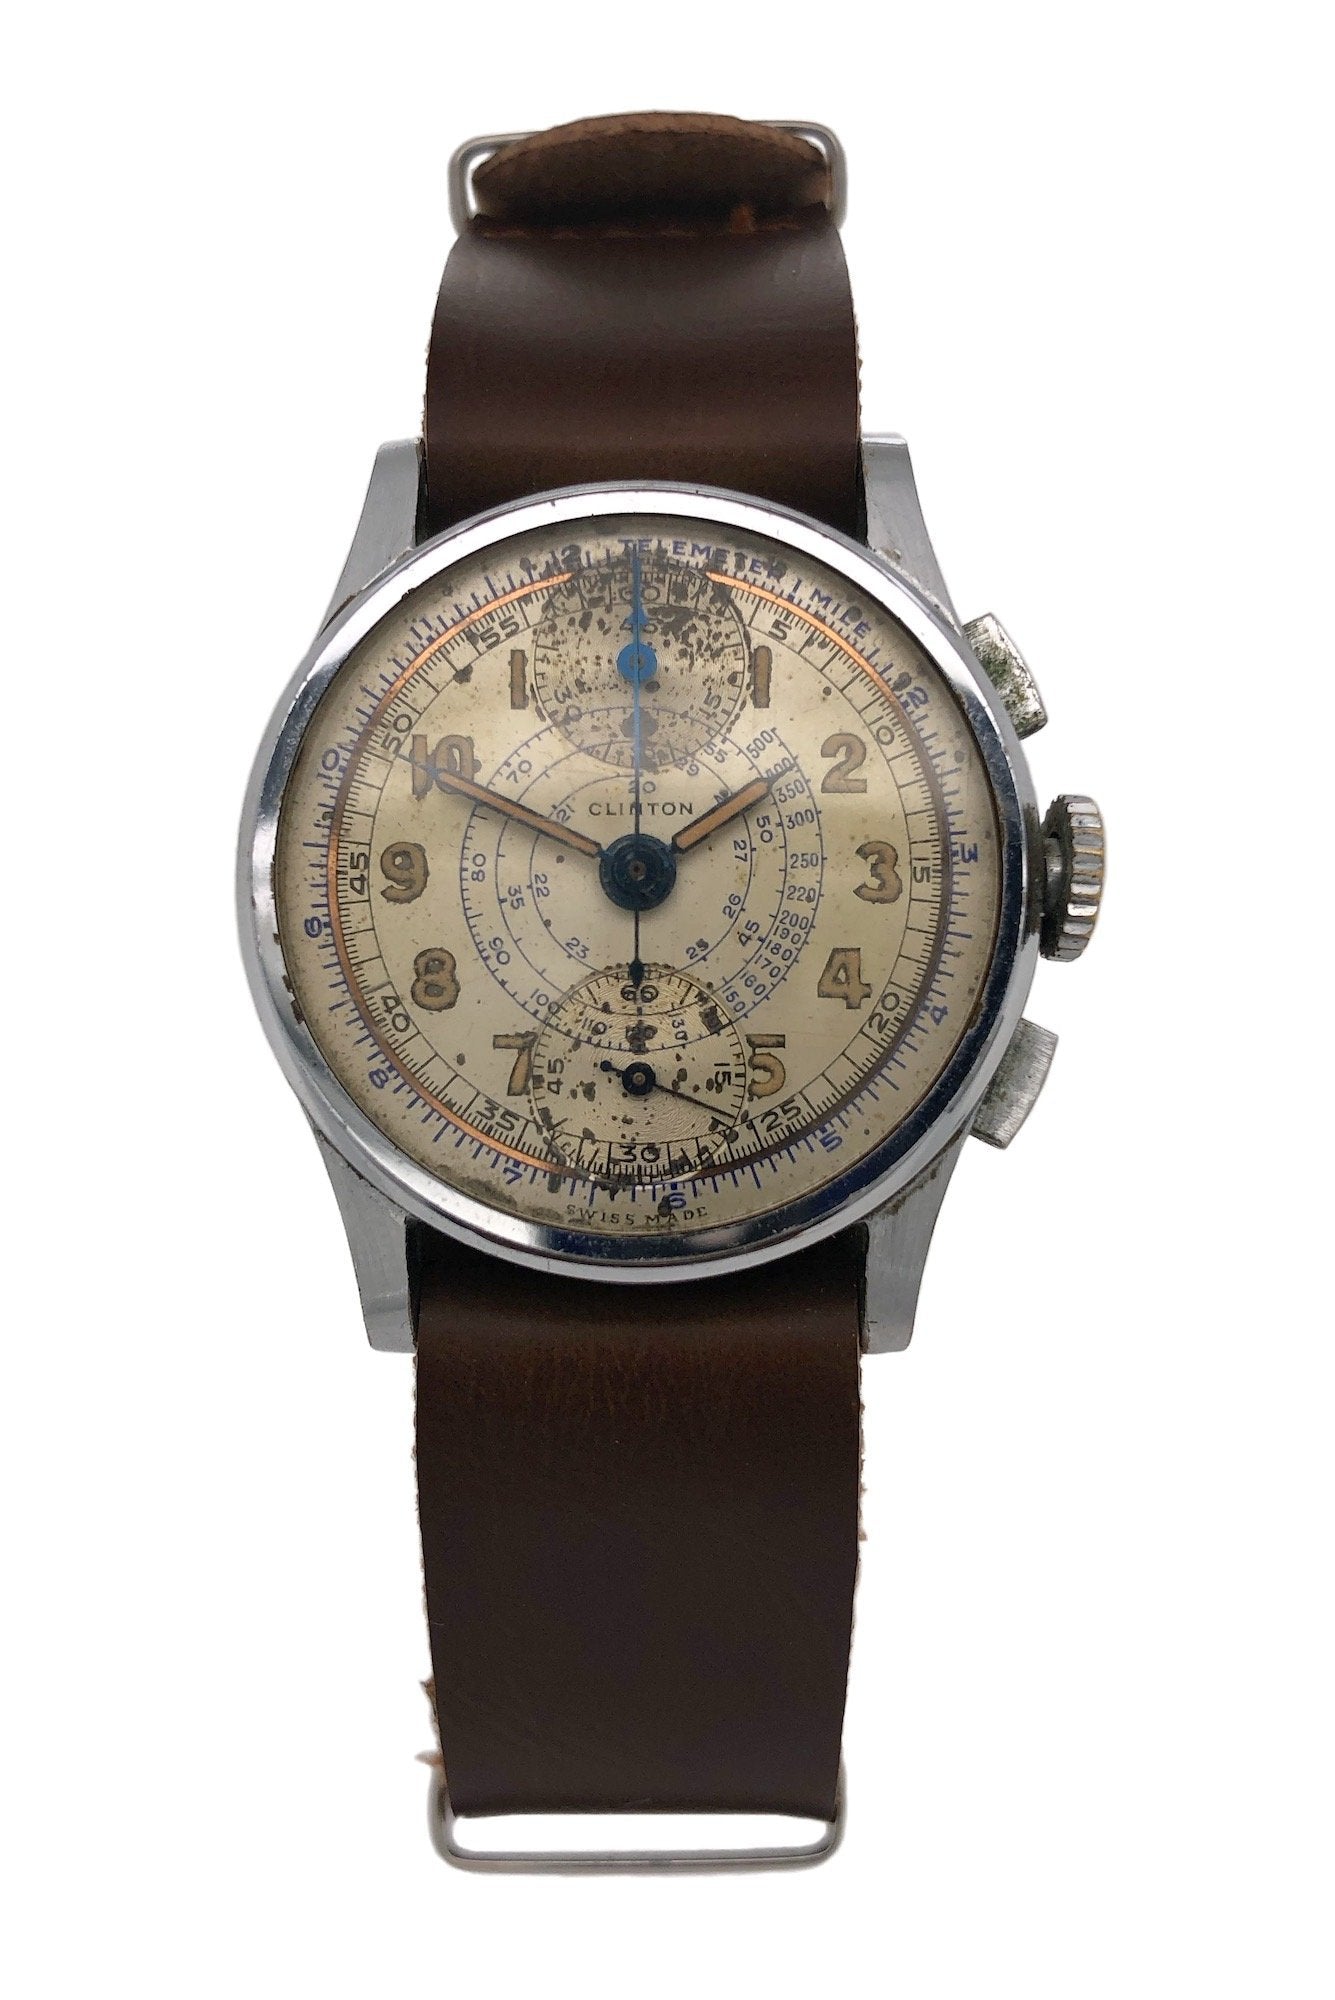 Clinton Watch Co Chronograph - Counting Time Watch Purveyors